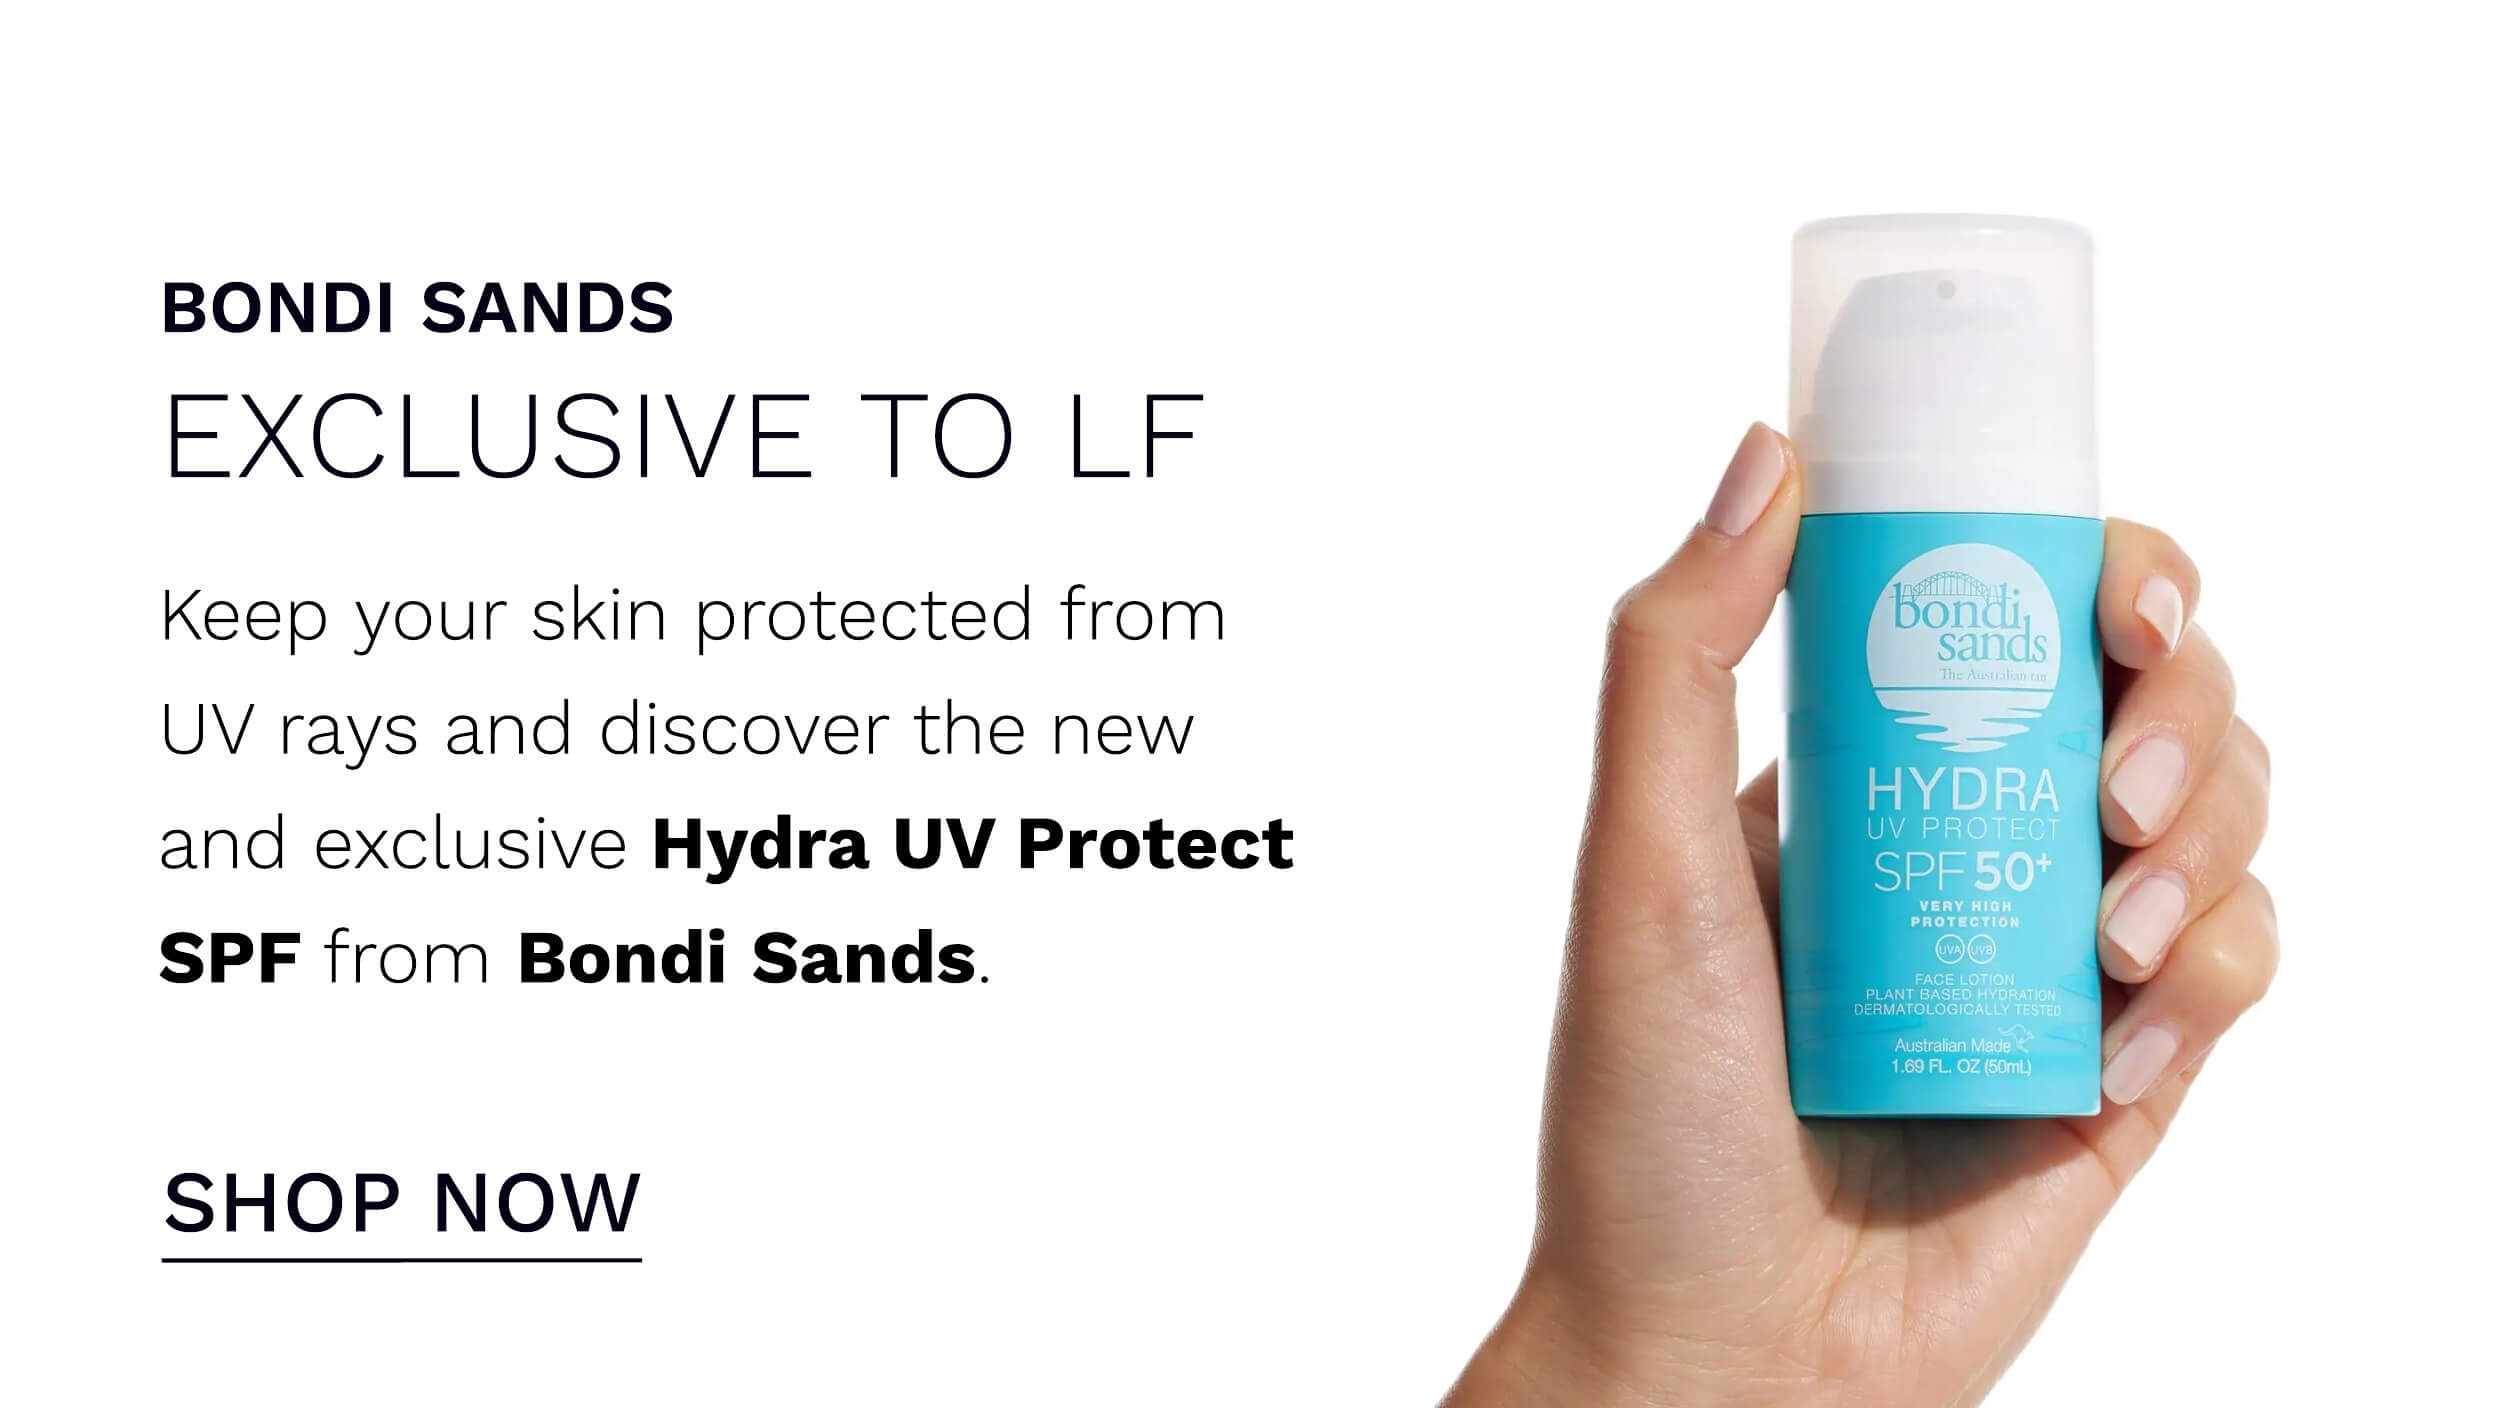 BONDI SANDS EXCLUSIVE TO LF Keep your skin protected from UV rays and discover the new and exclusive Hydra UV Protect SPF from Bondi Sands. SHOP NOW 